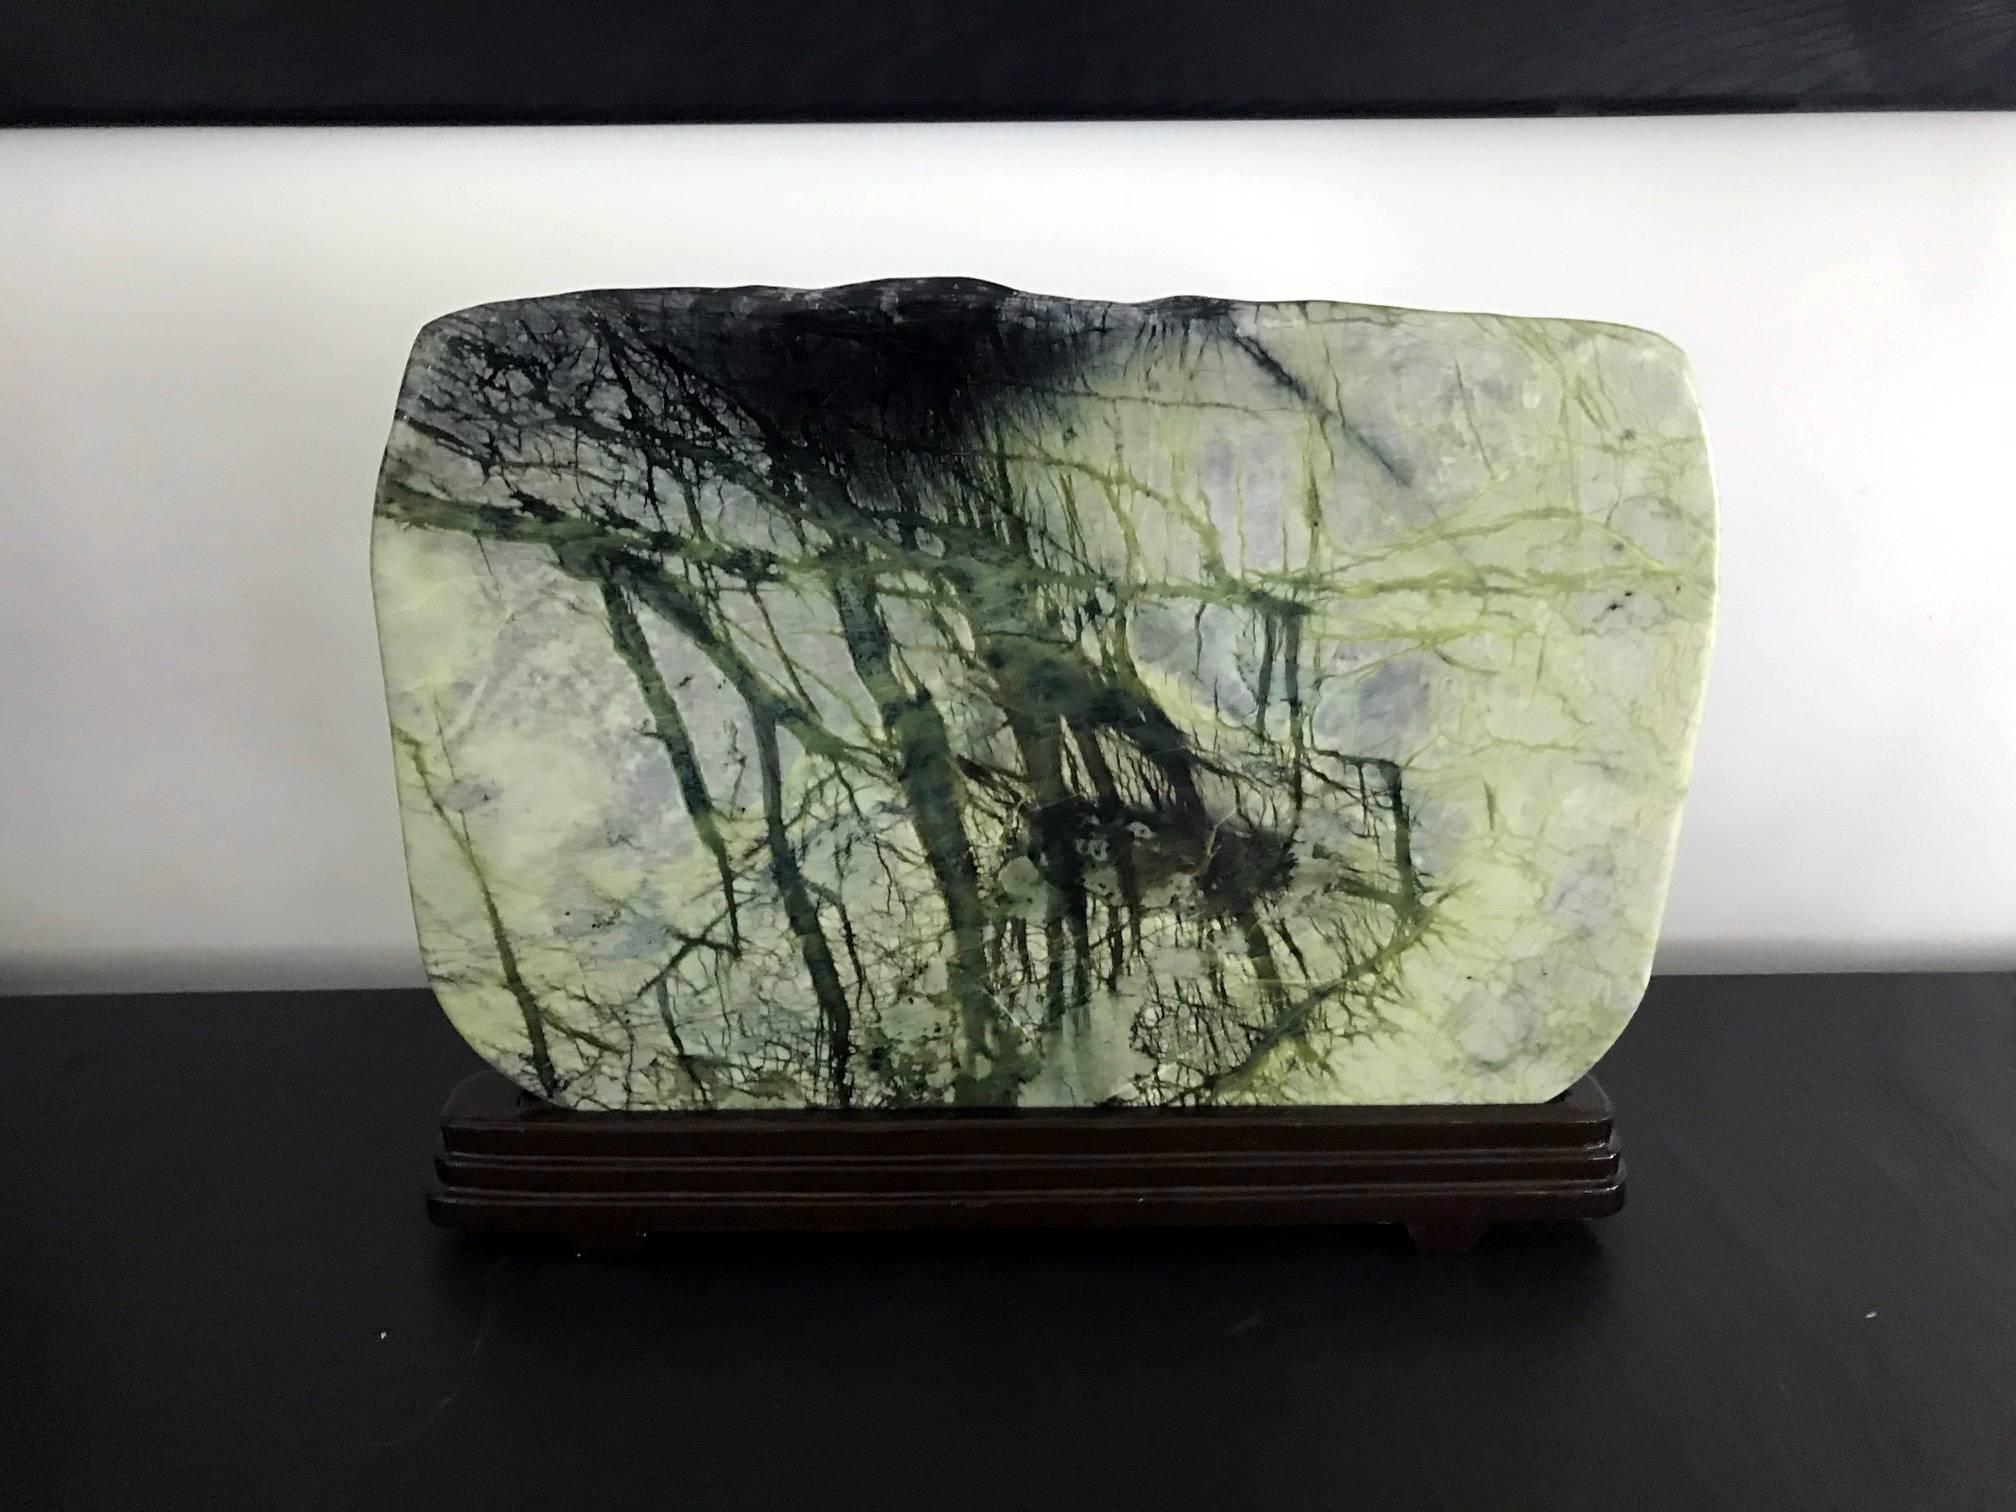 A beautiful scholar stone in the form of a jade plaque with natural green veins that resemble bamboo shoots, which show on both sides. This type of greenery stone is likely collected from Northeastern province of Liao Ning in China. It consists of